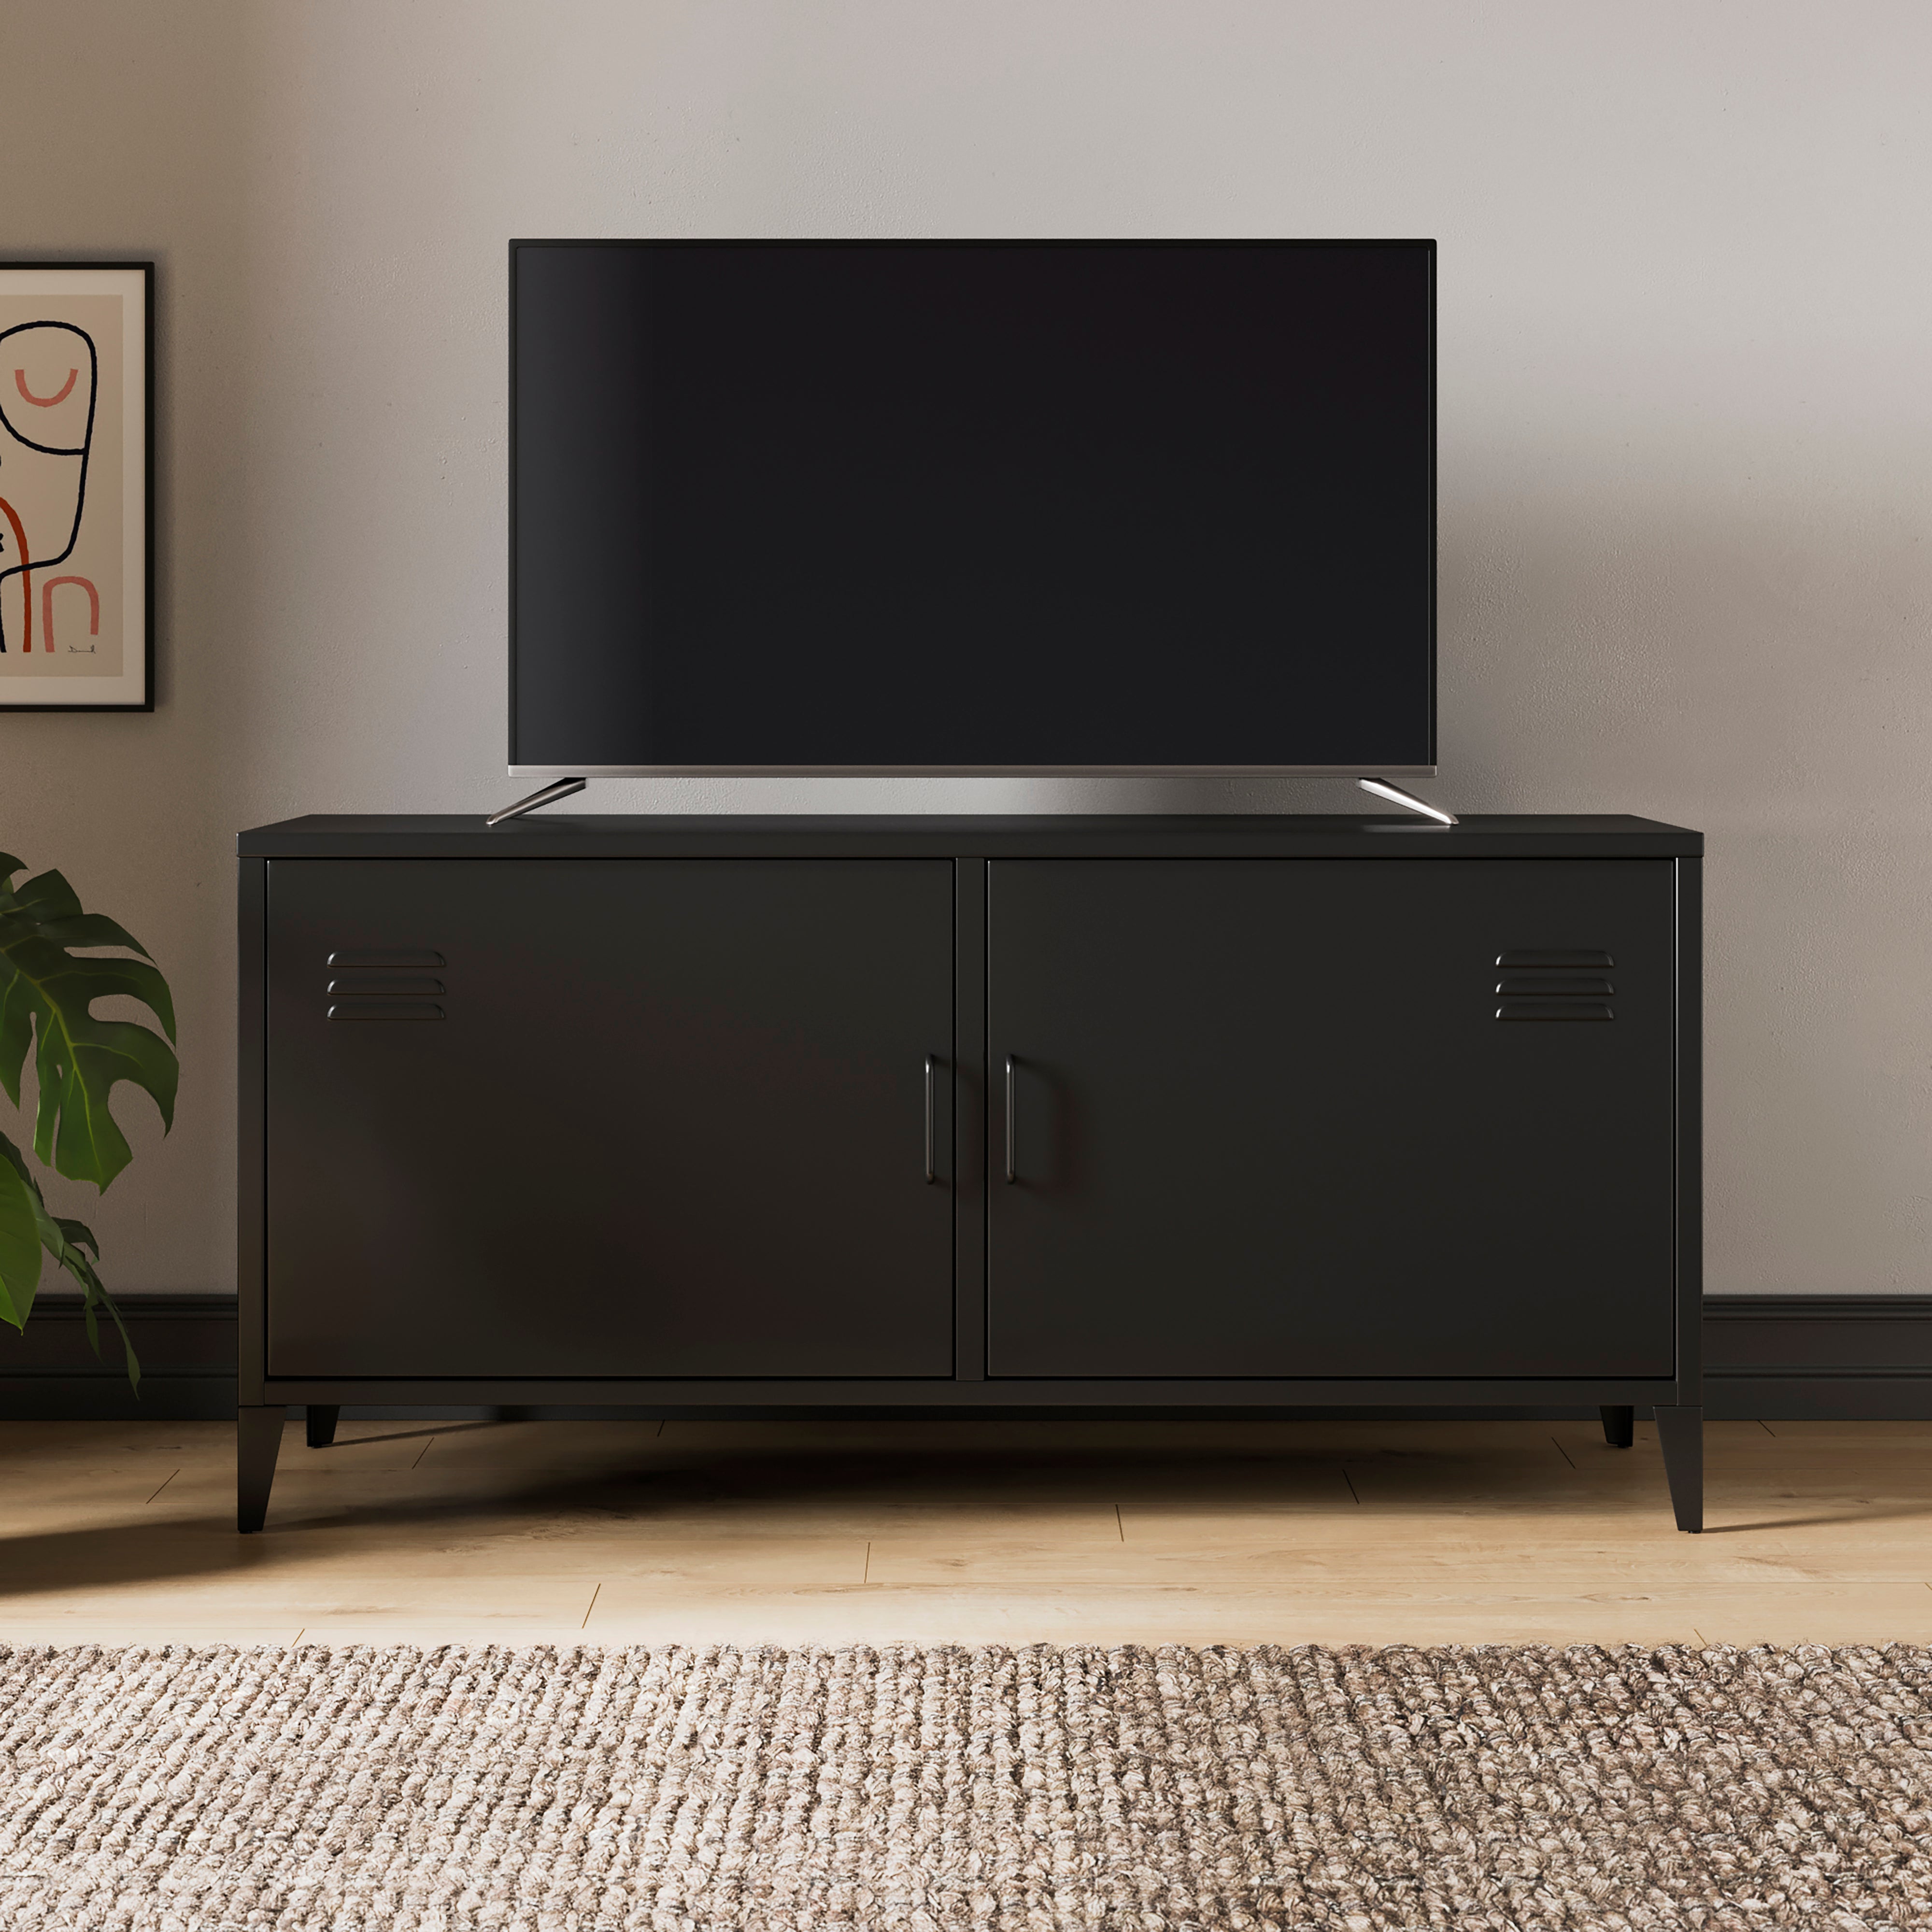 Helga Metal Tv Stand For Tvs Up To 50 Black